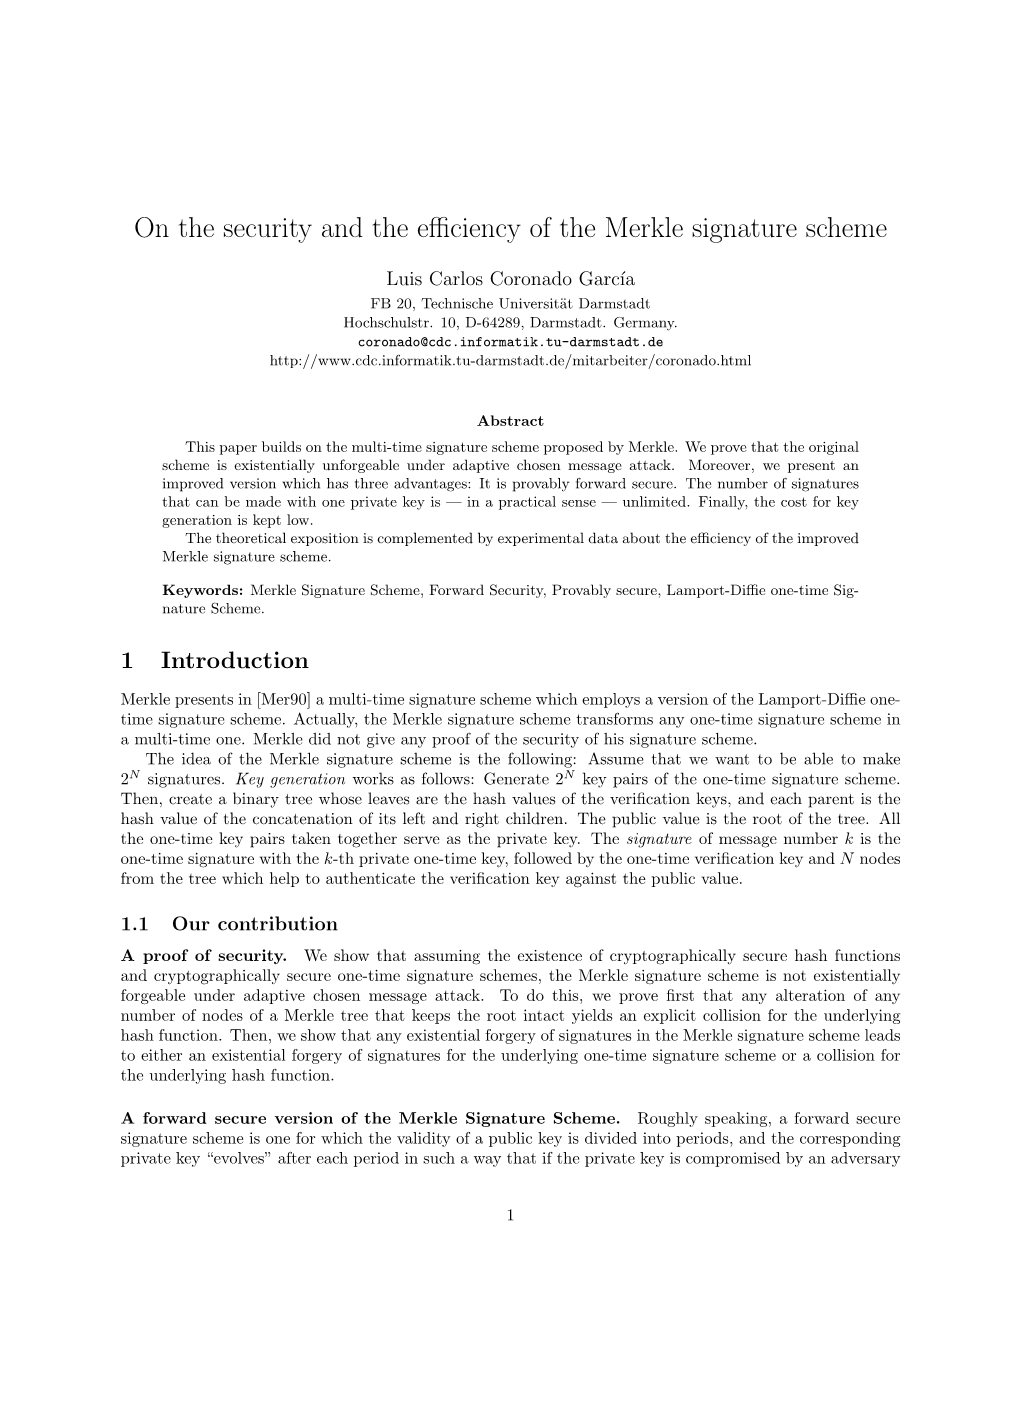 On the Security and the Efficiency of the Merkle Signature Scheme